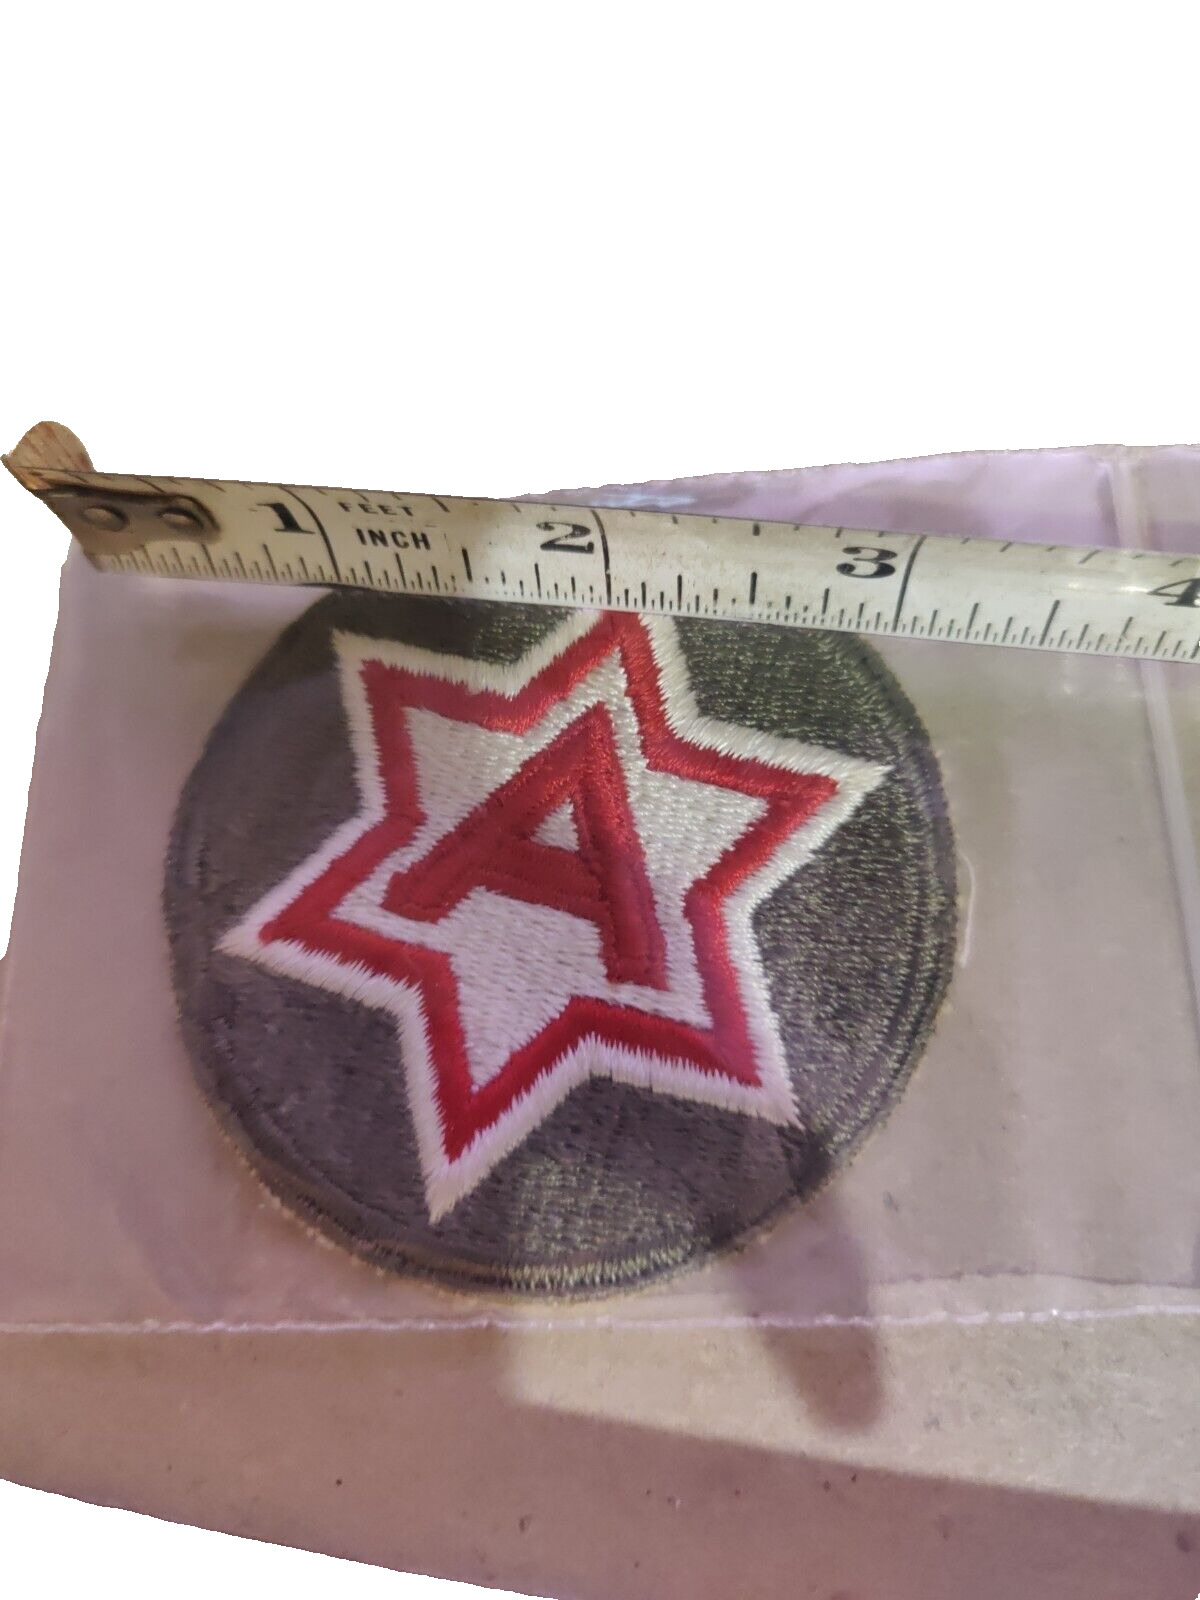 VINTAGE EMBROIDERED PATCH US ARMY 6TH STAR W/RED A 6 POINT WWII WW2